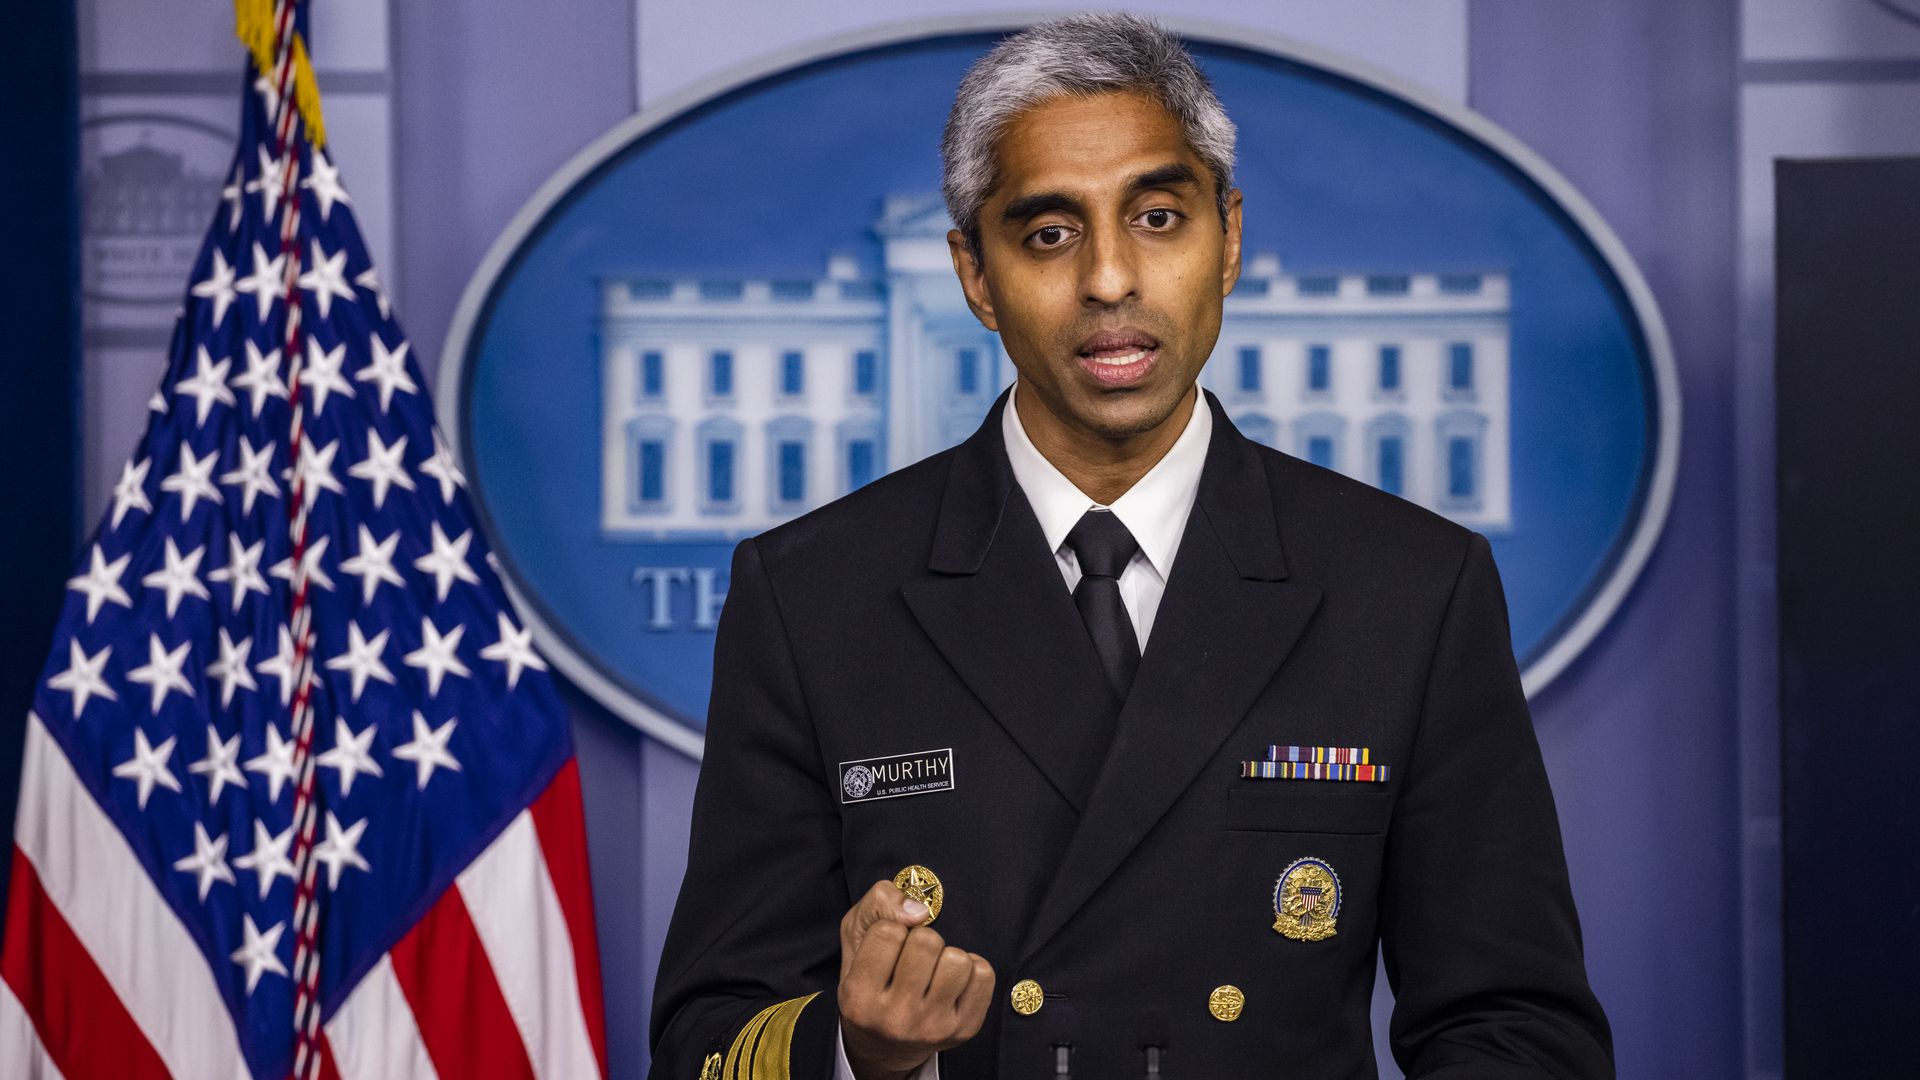 Surgeon General Vivek Murthy speaks from the White House press briefing room podium